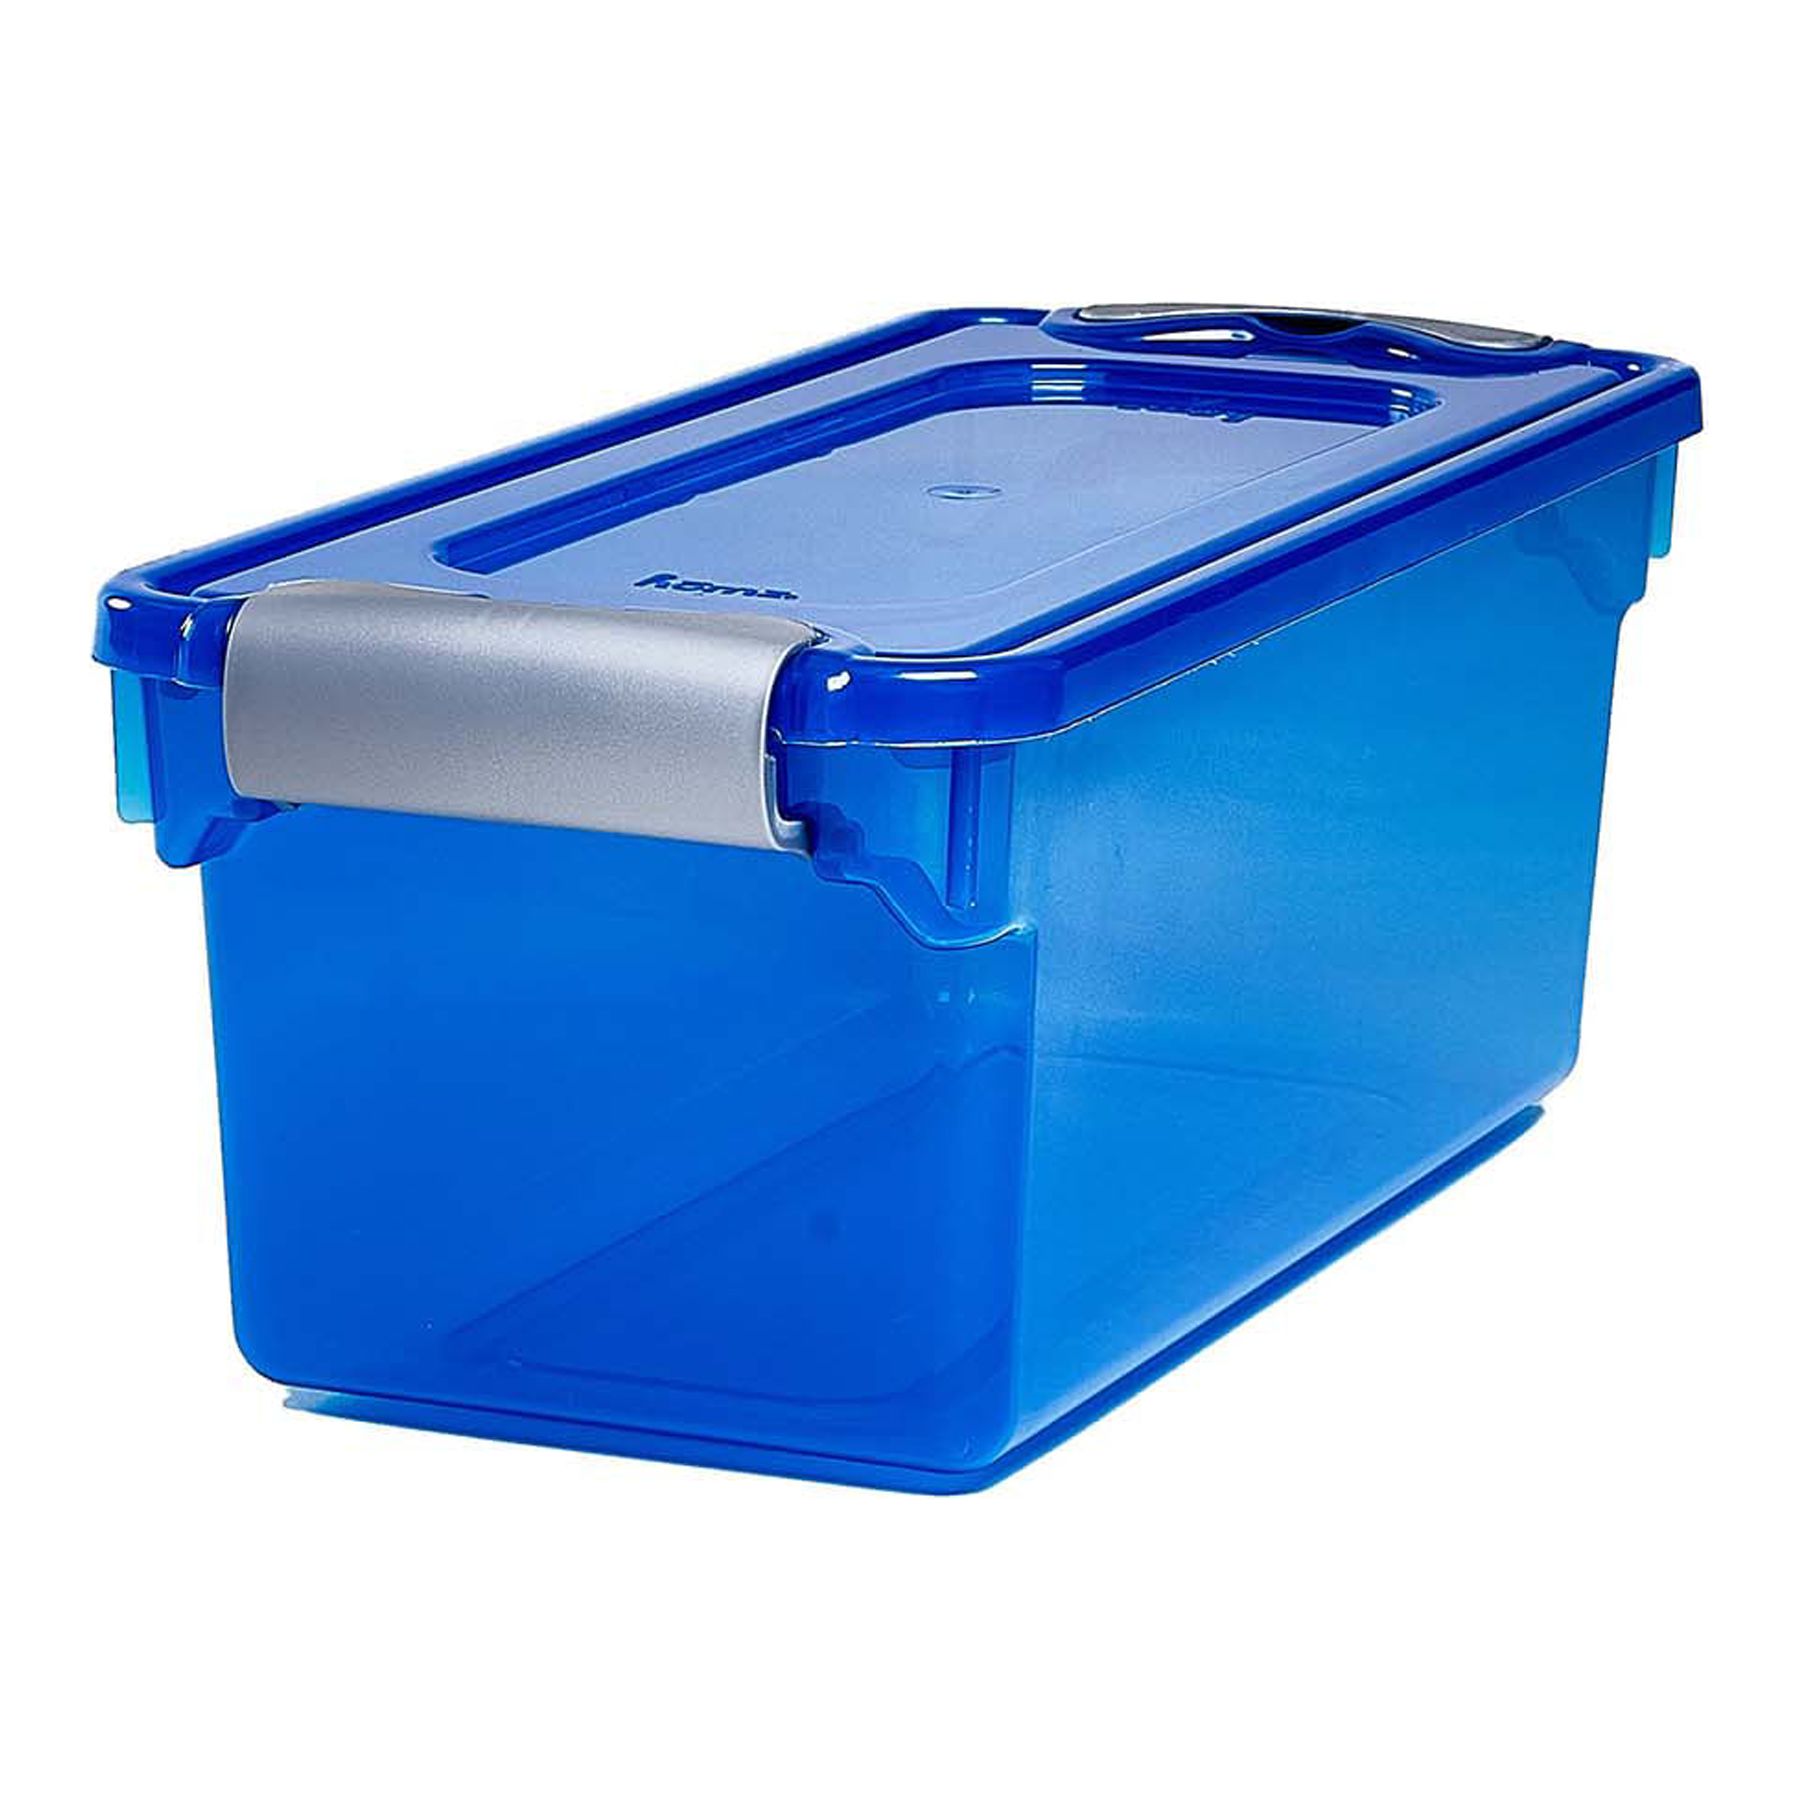 Homz 1.8 Gallon Plastic Storage Container, Blue and Clear - image 1 of 5